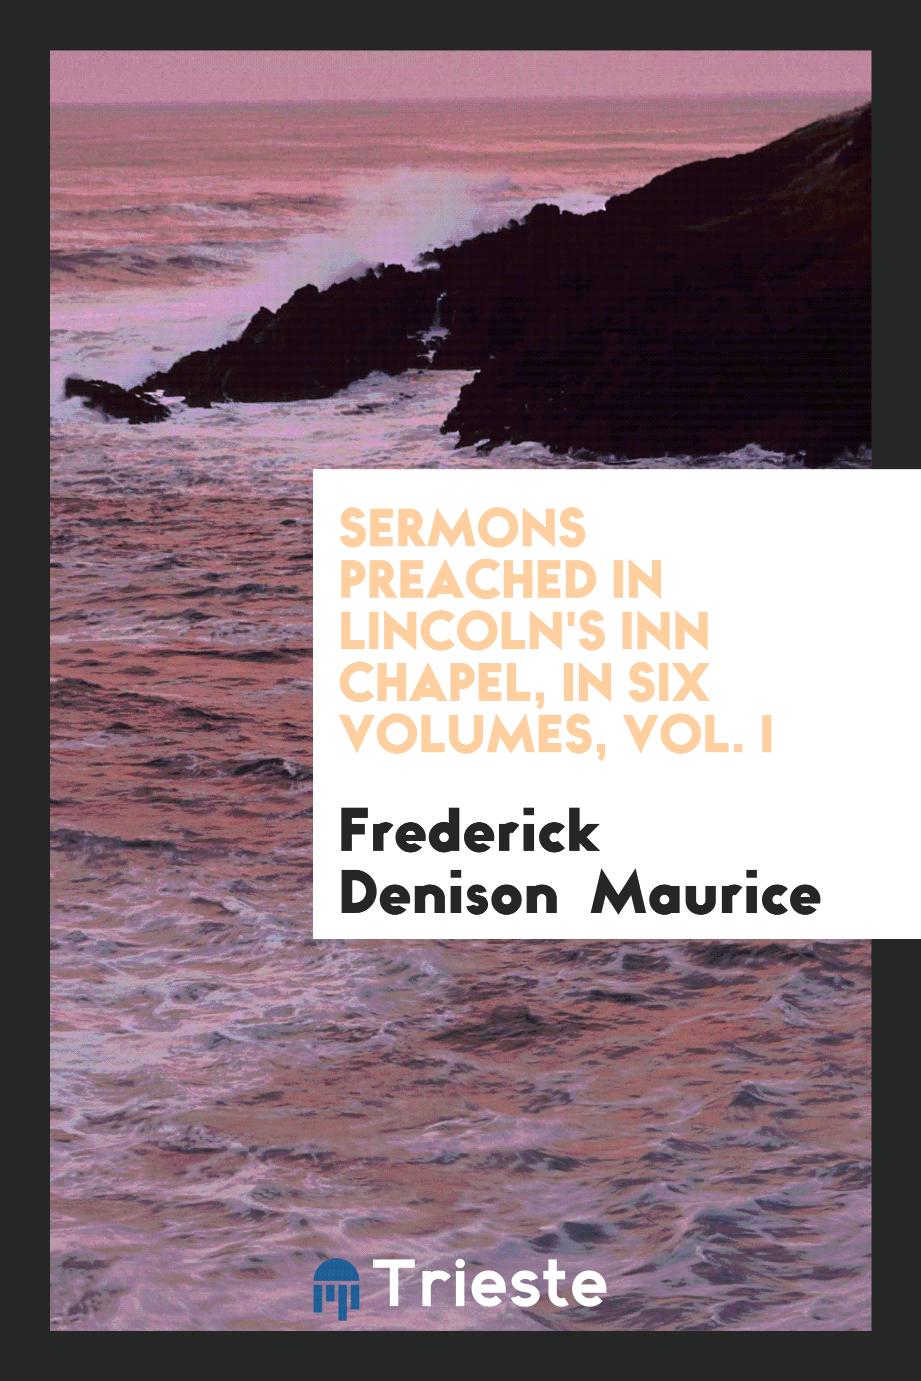 Sermons Preached in Lincoln's Inn Chapel, in Six Volumes, Vol. I